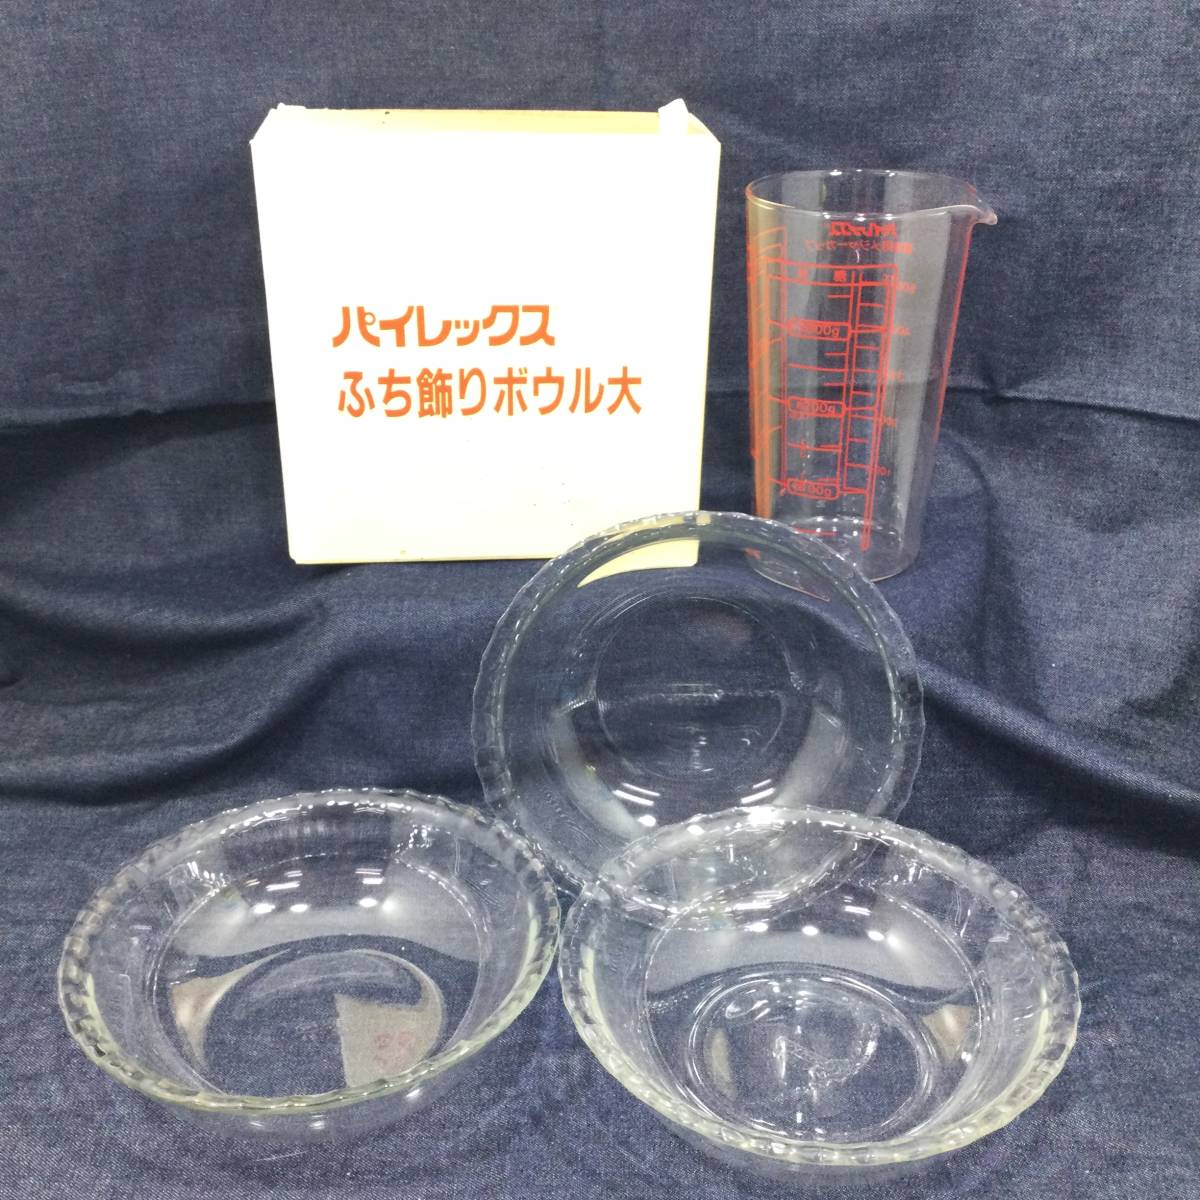 [ unused contains ] Pyrex light weight cup brink decoration glass bowl 3 point contains heat-resisting set sale 4 point set wheat sugar Pyrex (H617)